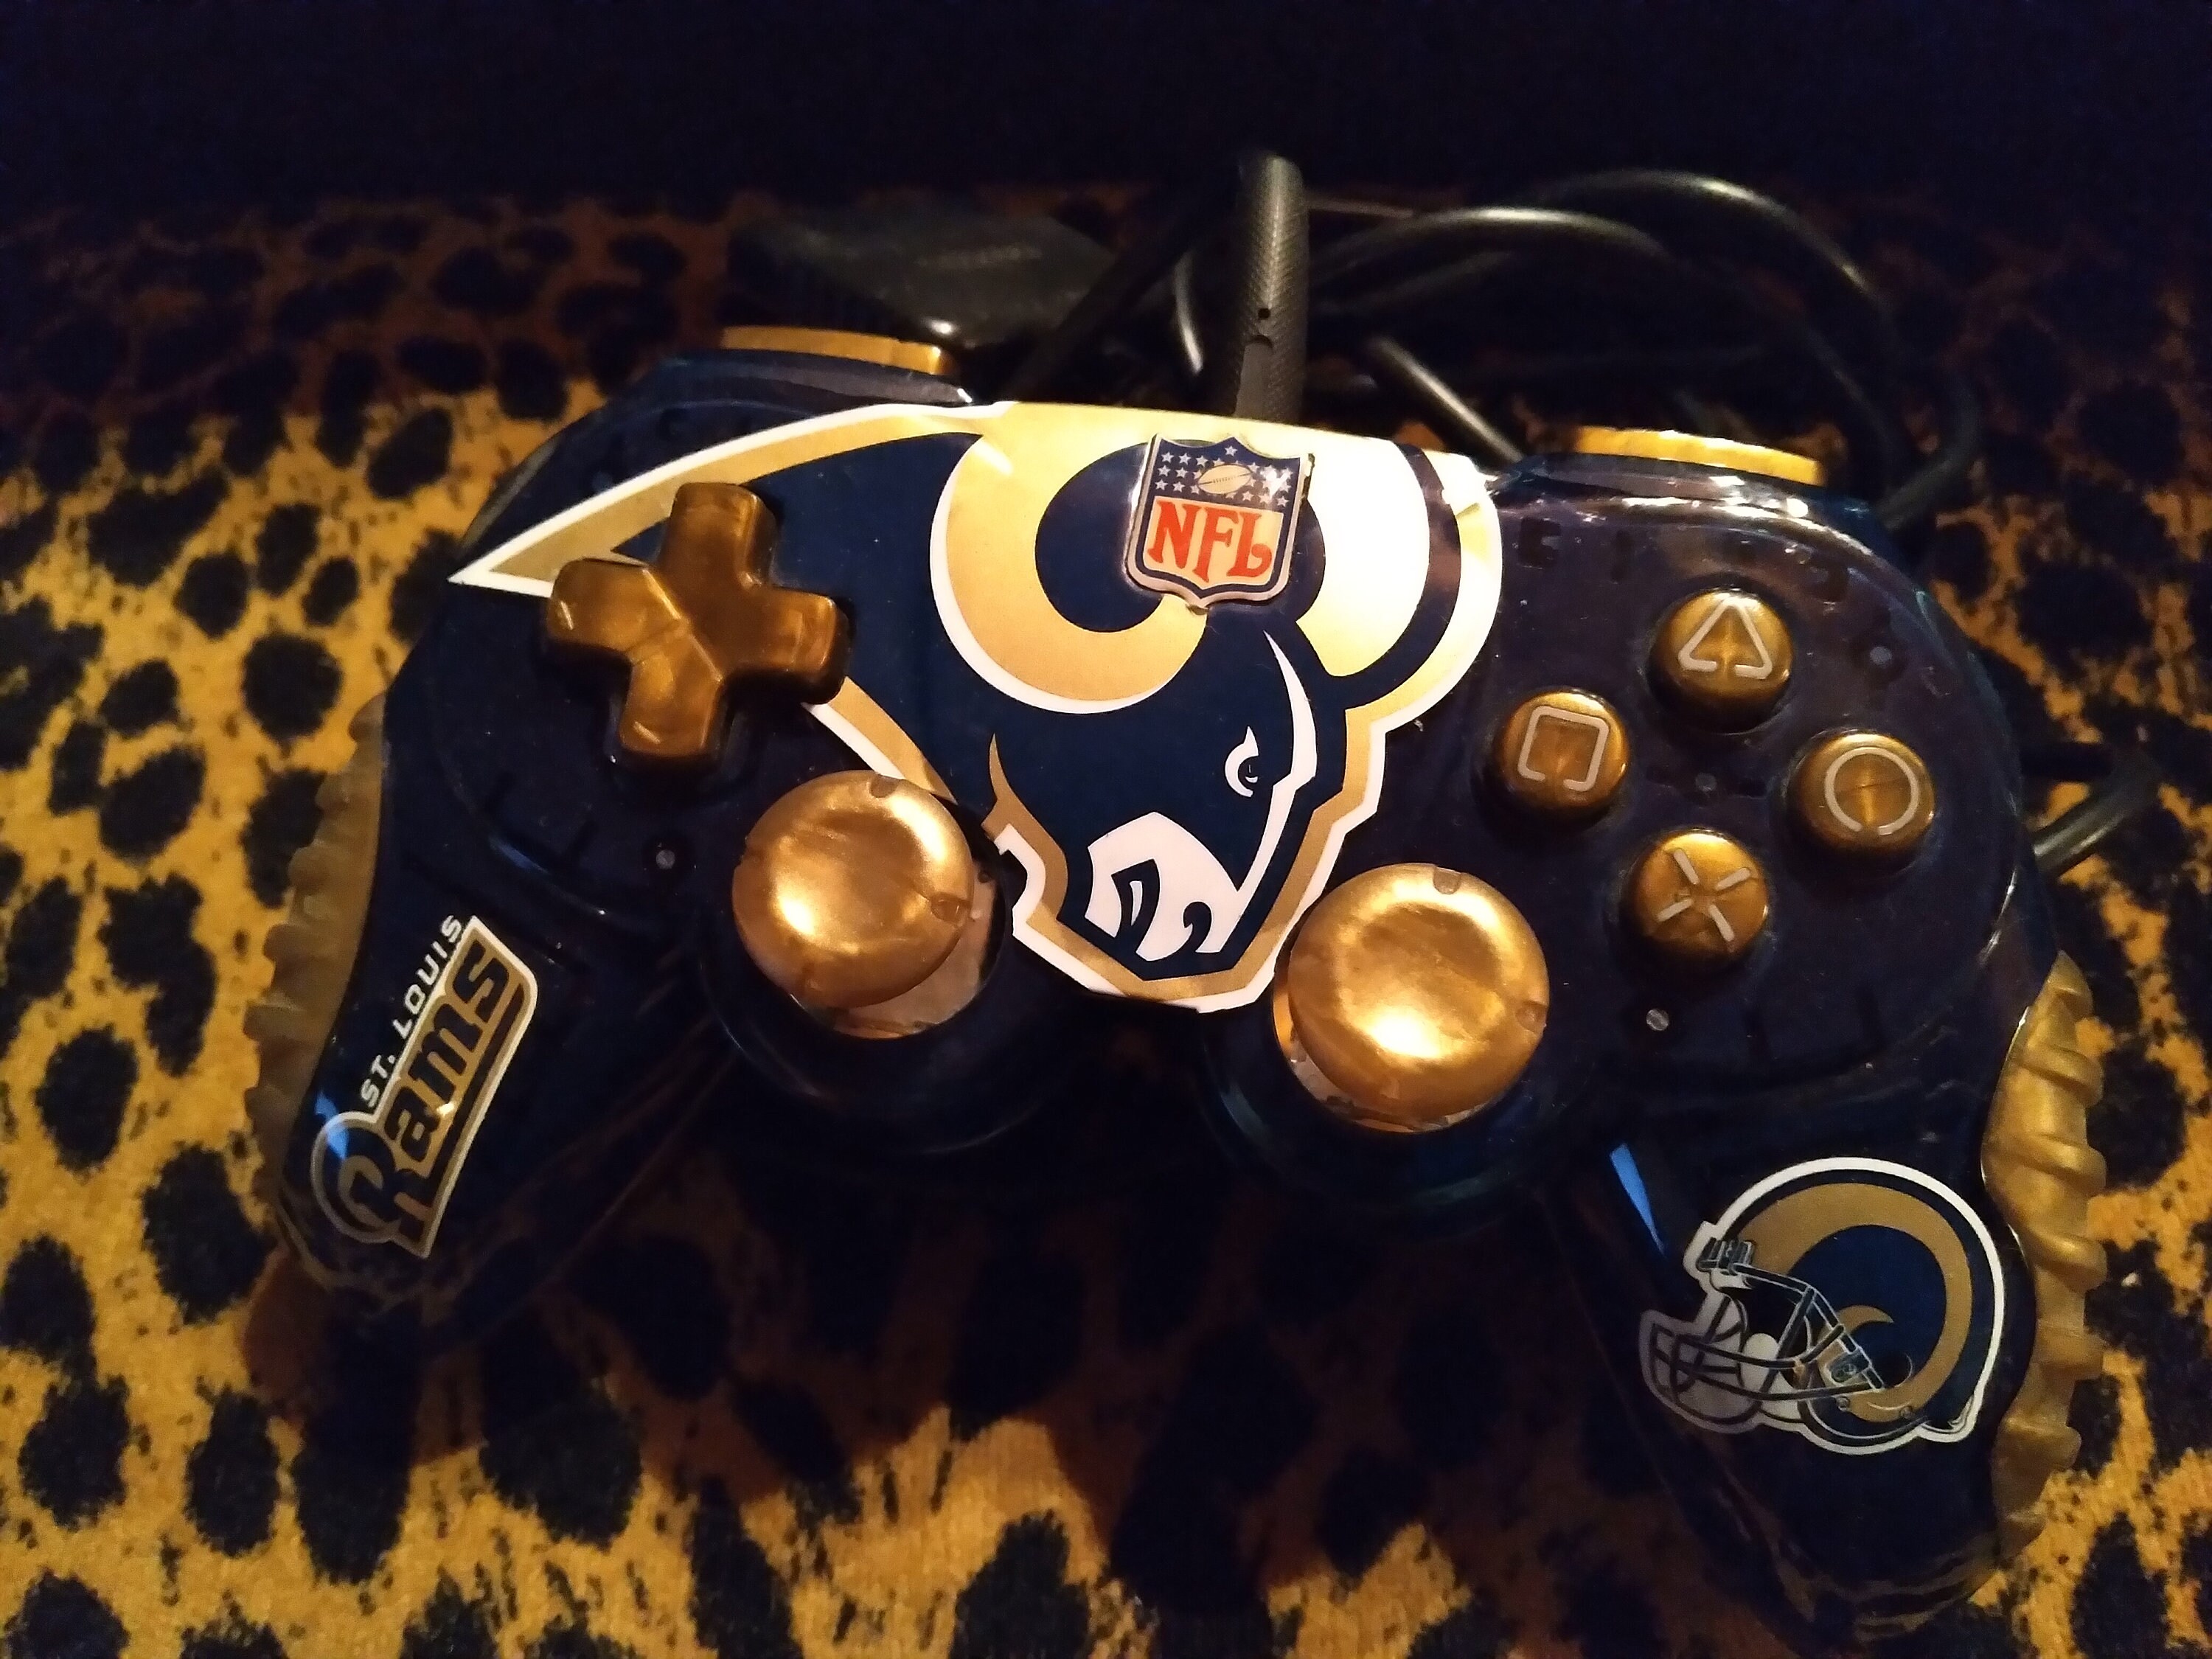 Super Bowl Champion RAMS PS2 Wired NFL Control Pad Mad Katz St Louis -   Canada